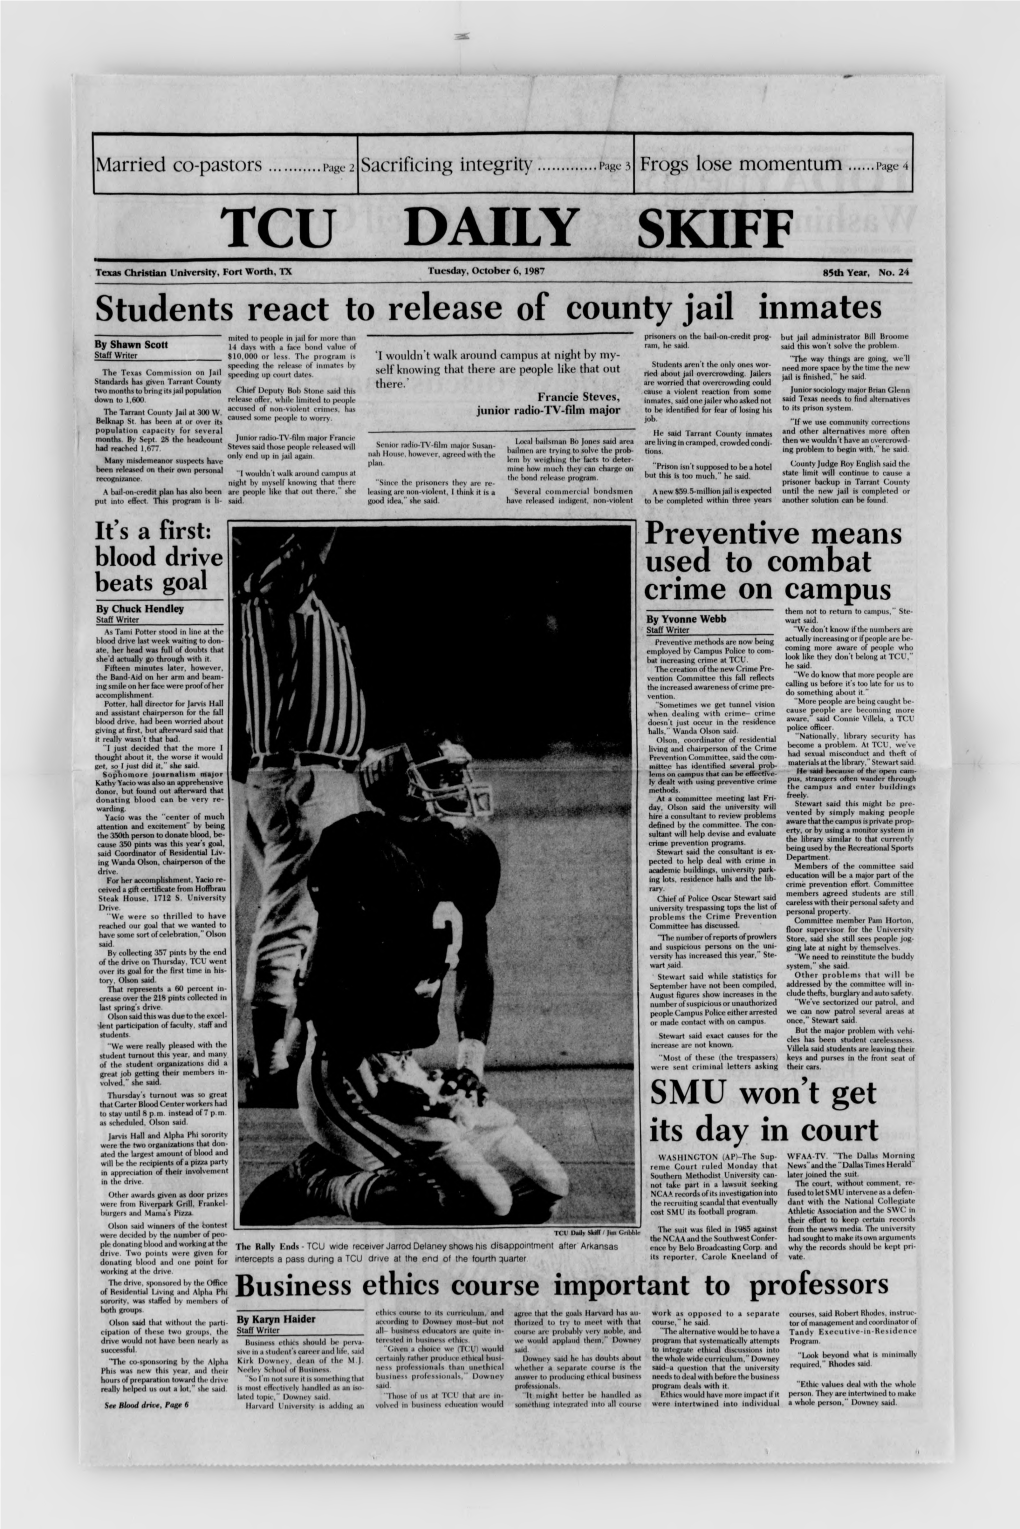 TCU DAILY SKIFF Texas Christian University, Fort Worth, TX Tuesday, October 6, 1987 85Th Year, No